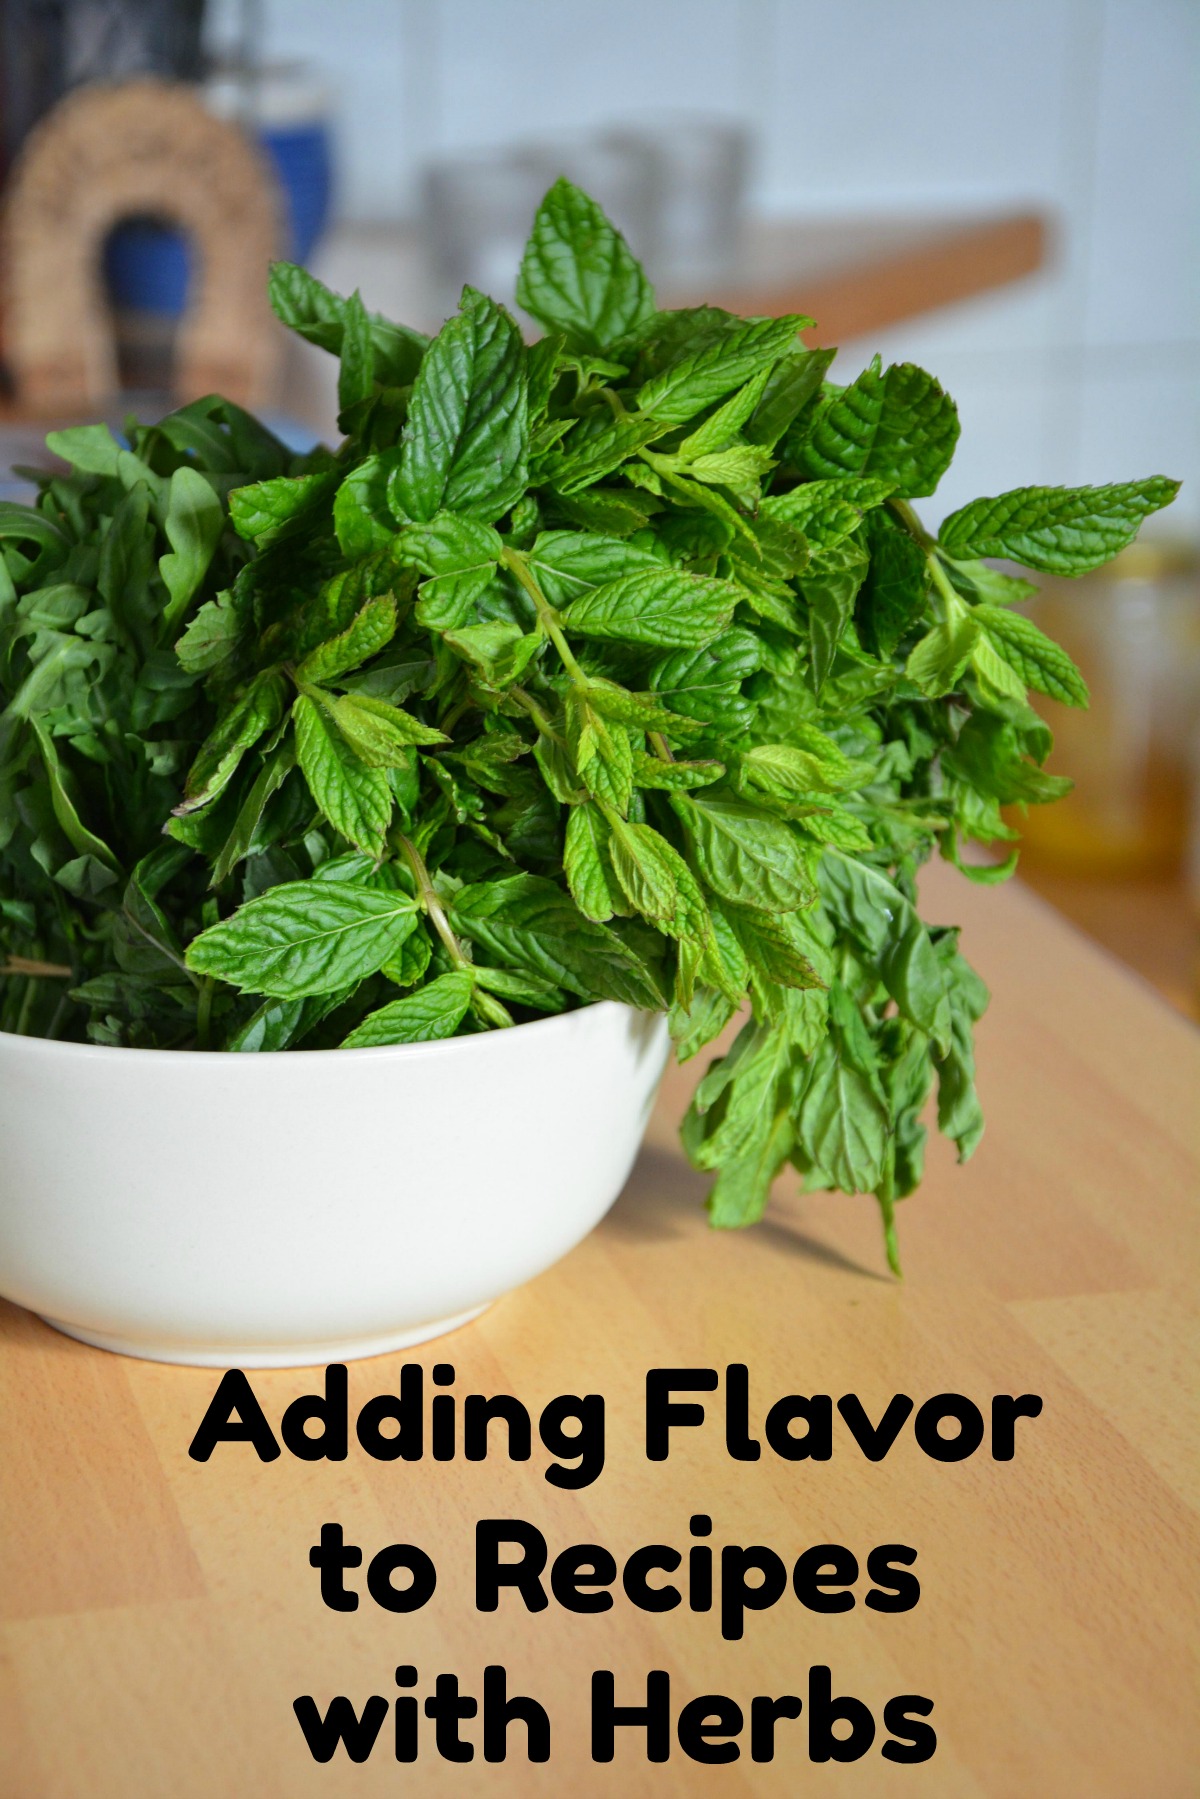 Adding Flavor to Recipes with Herbs